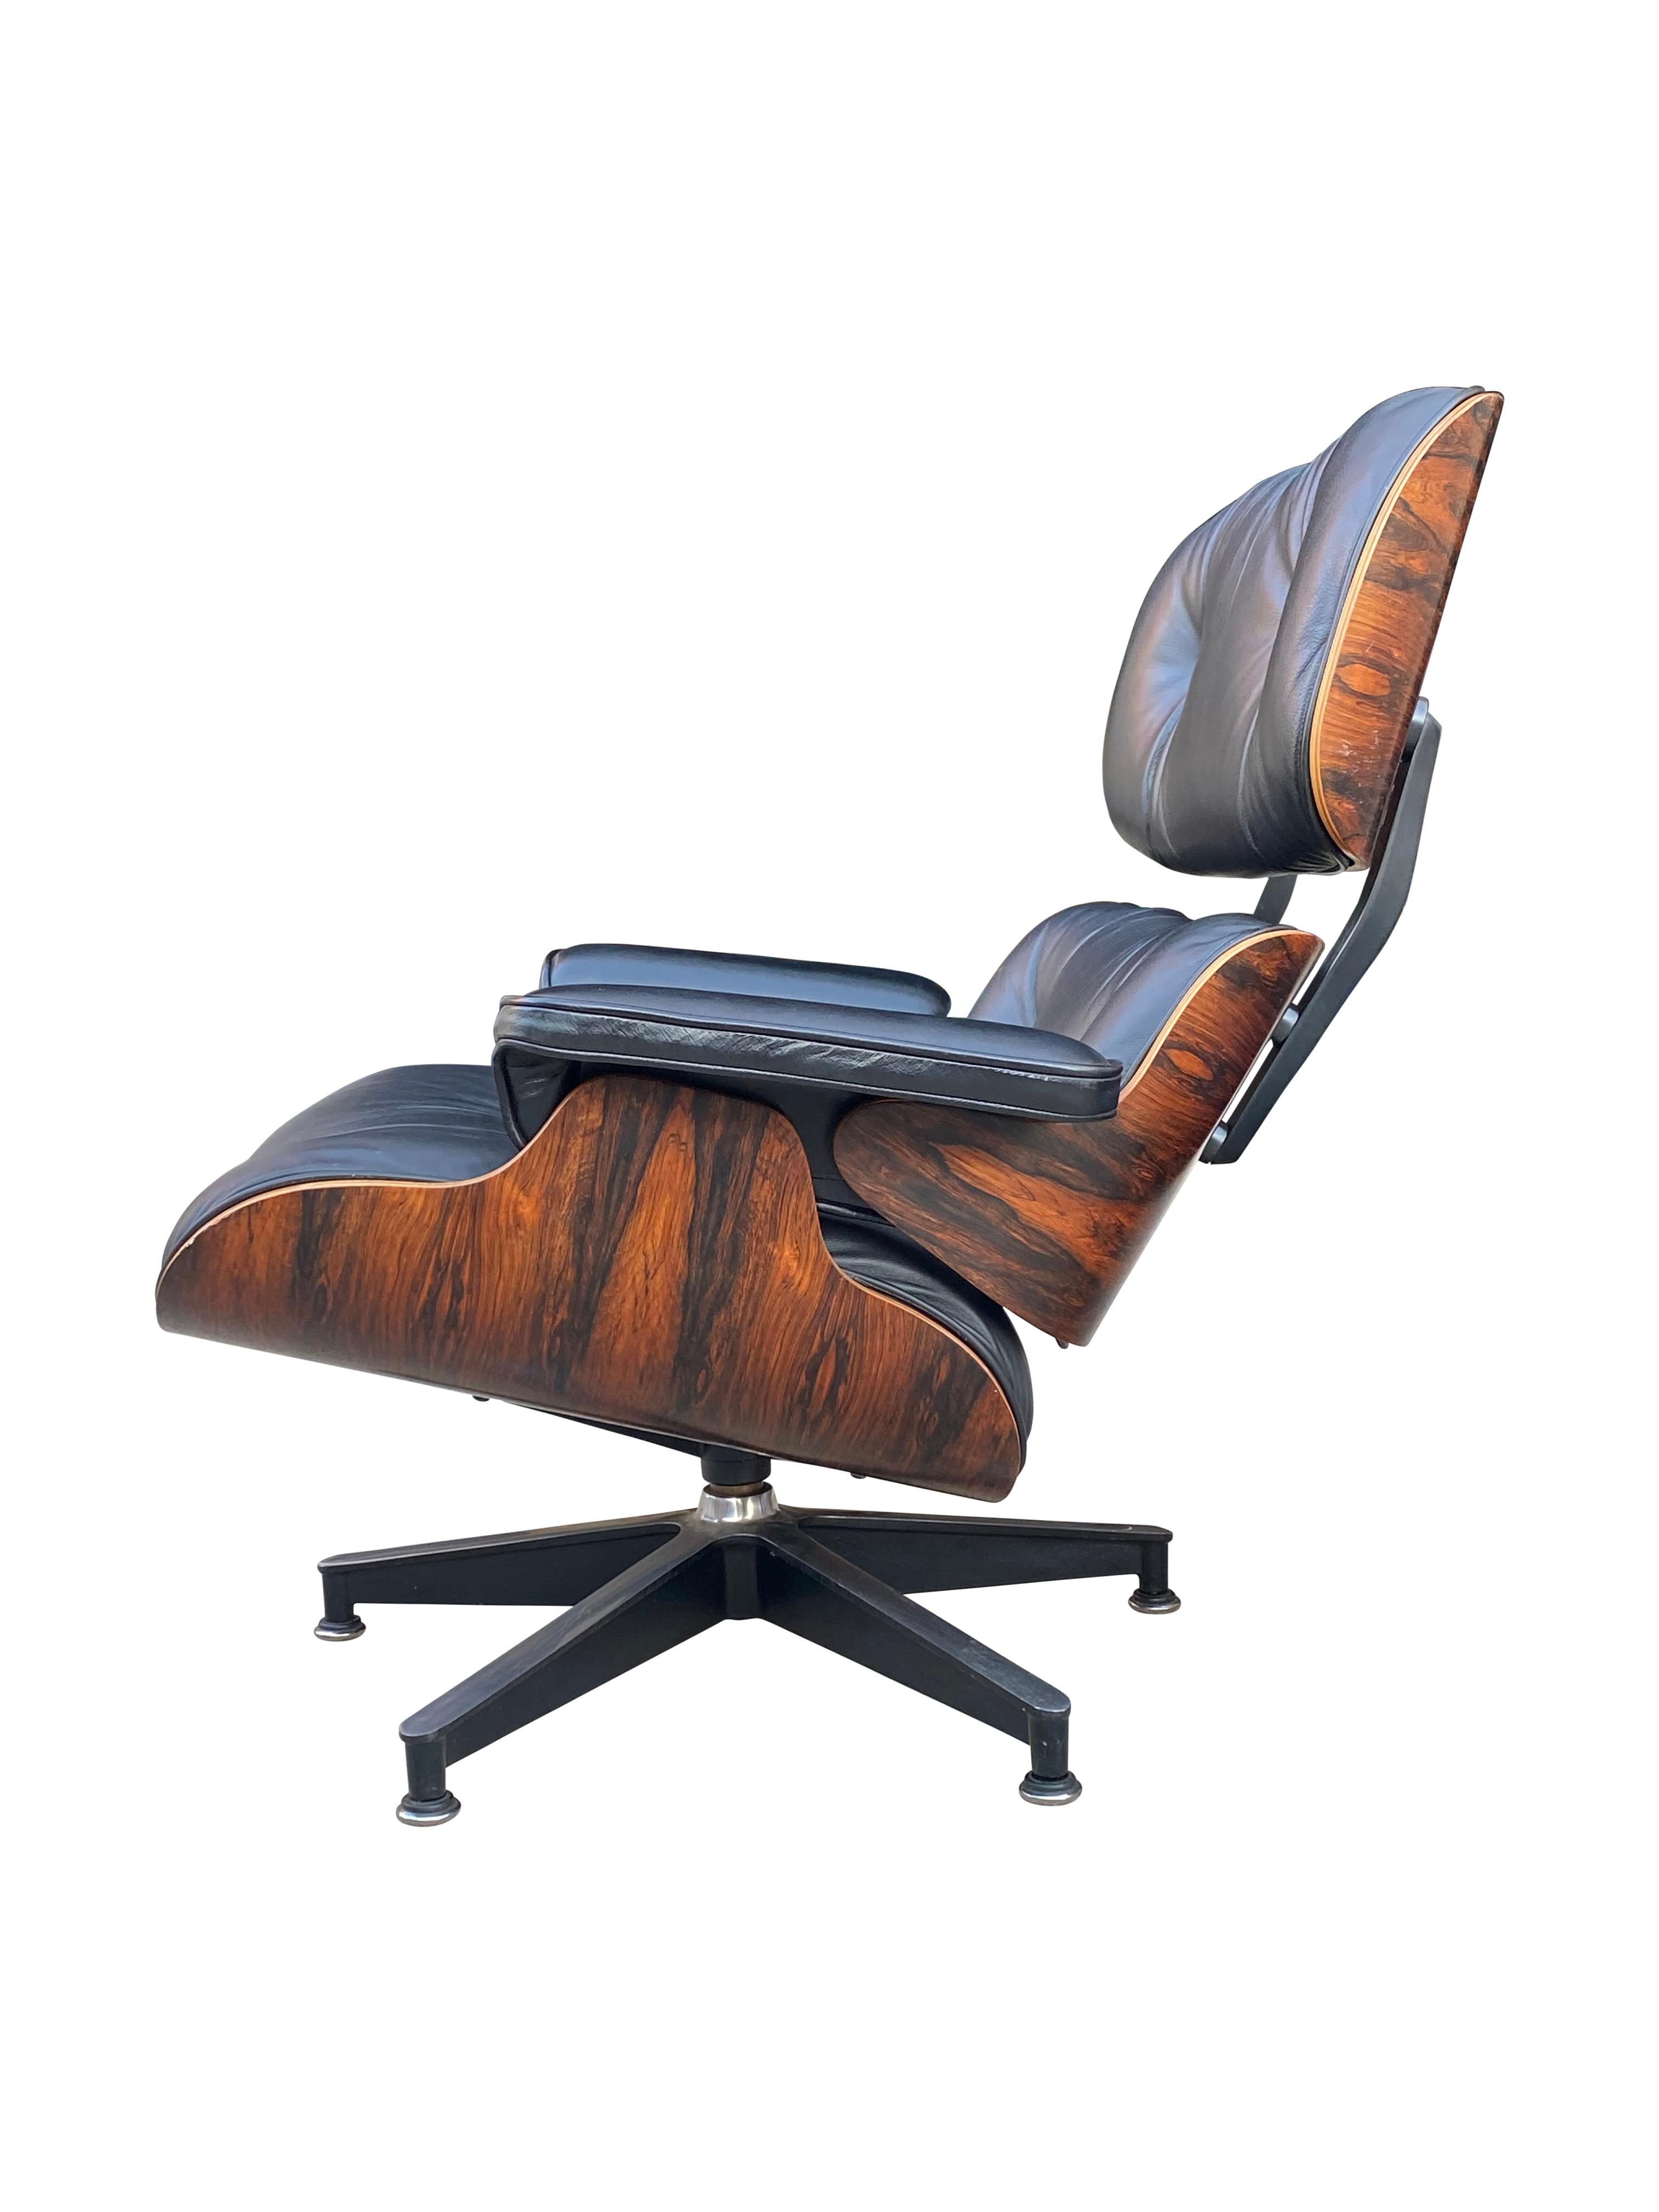 20th Century Spectacular Herman Miller Eames Lounge Chair and Ottoman